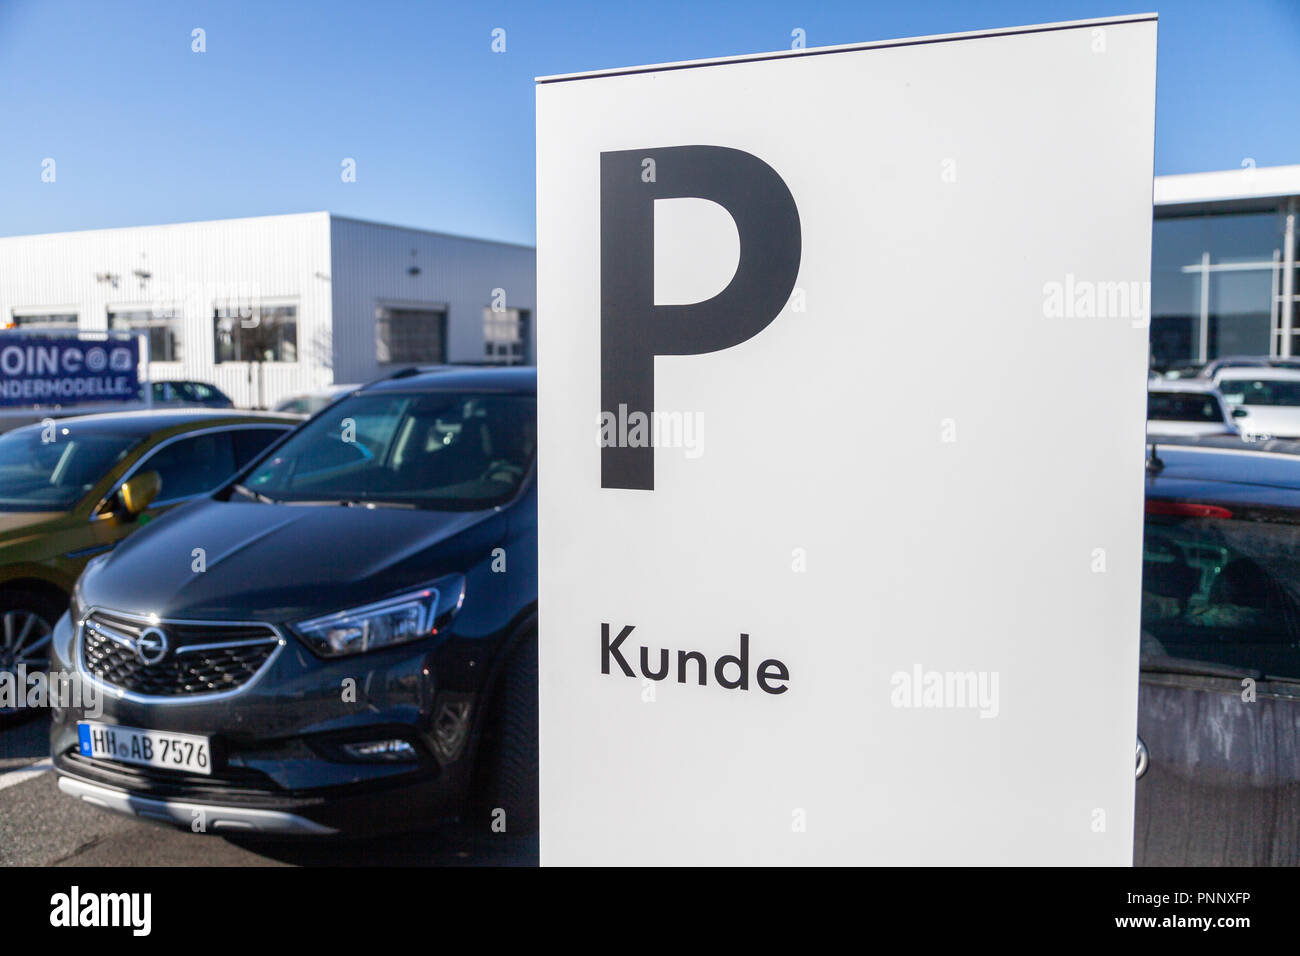 FUERTH / GERMANY - FEBRUARY 25, 2018: Parking area sign near a Volkswagen car dealer. Kunde means customer. Volkswagen is a German automaker founded o Stock Photo